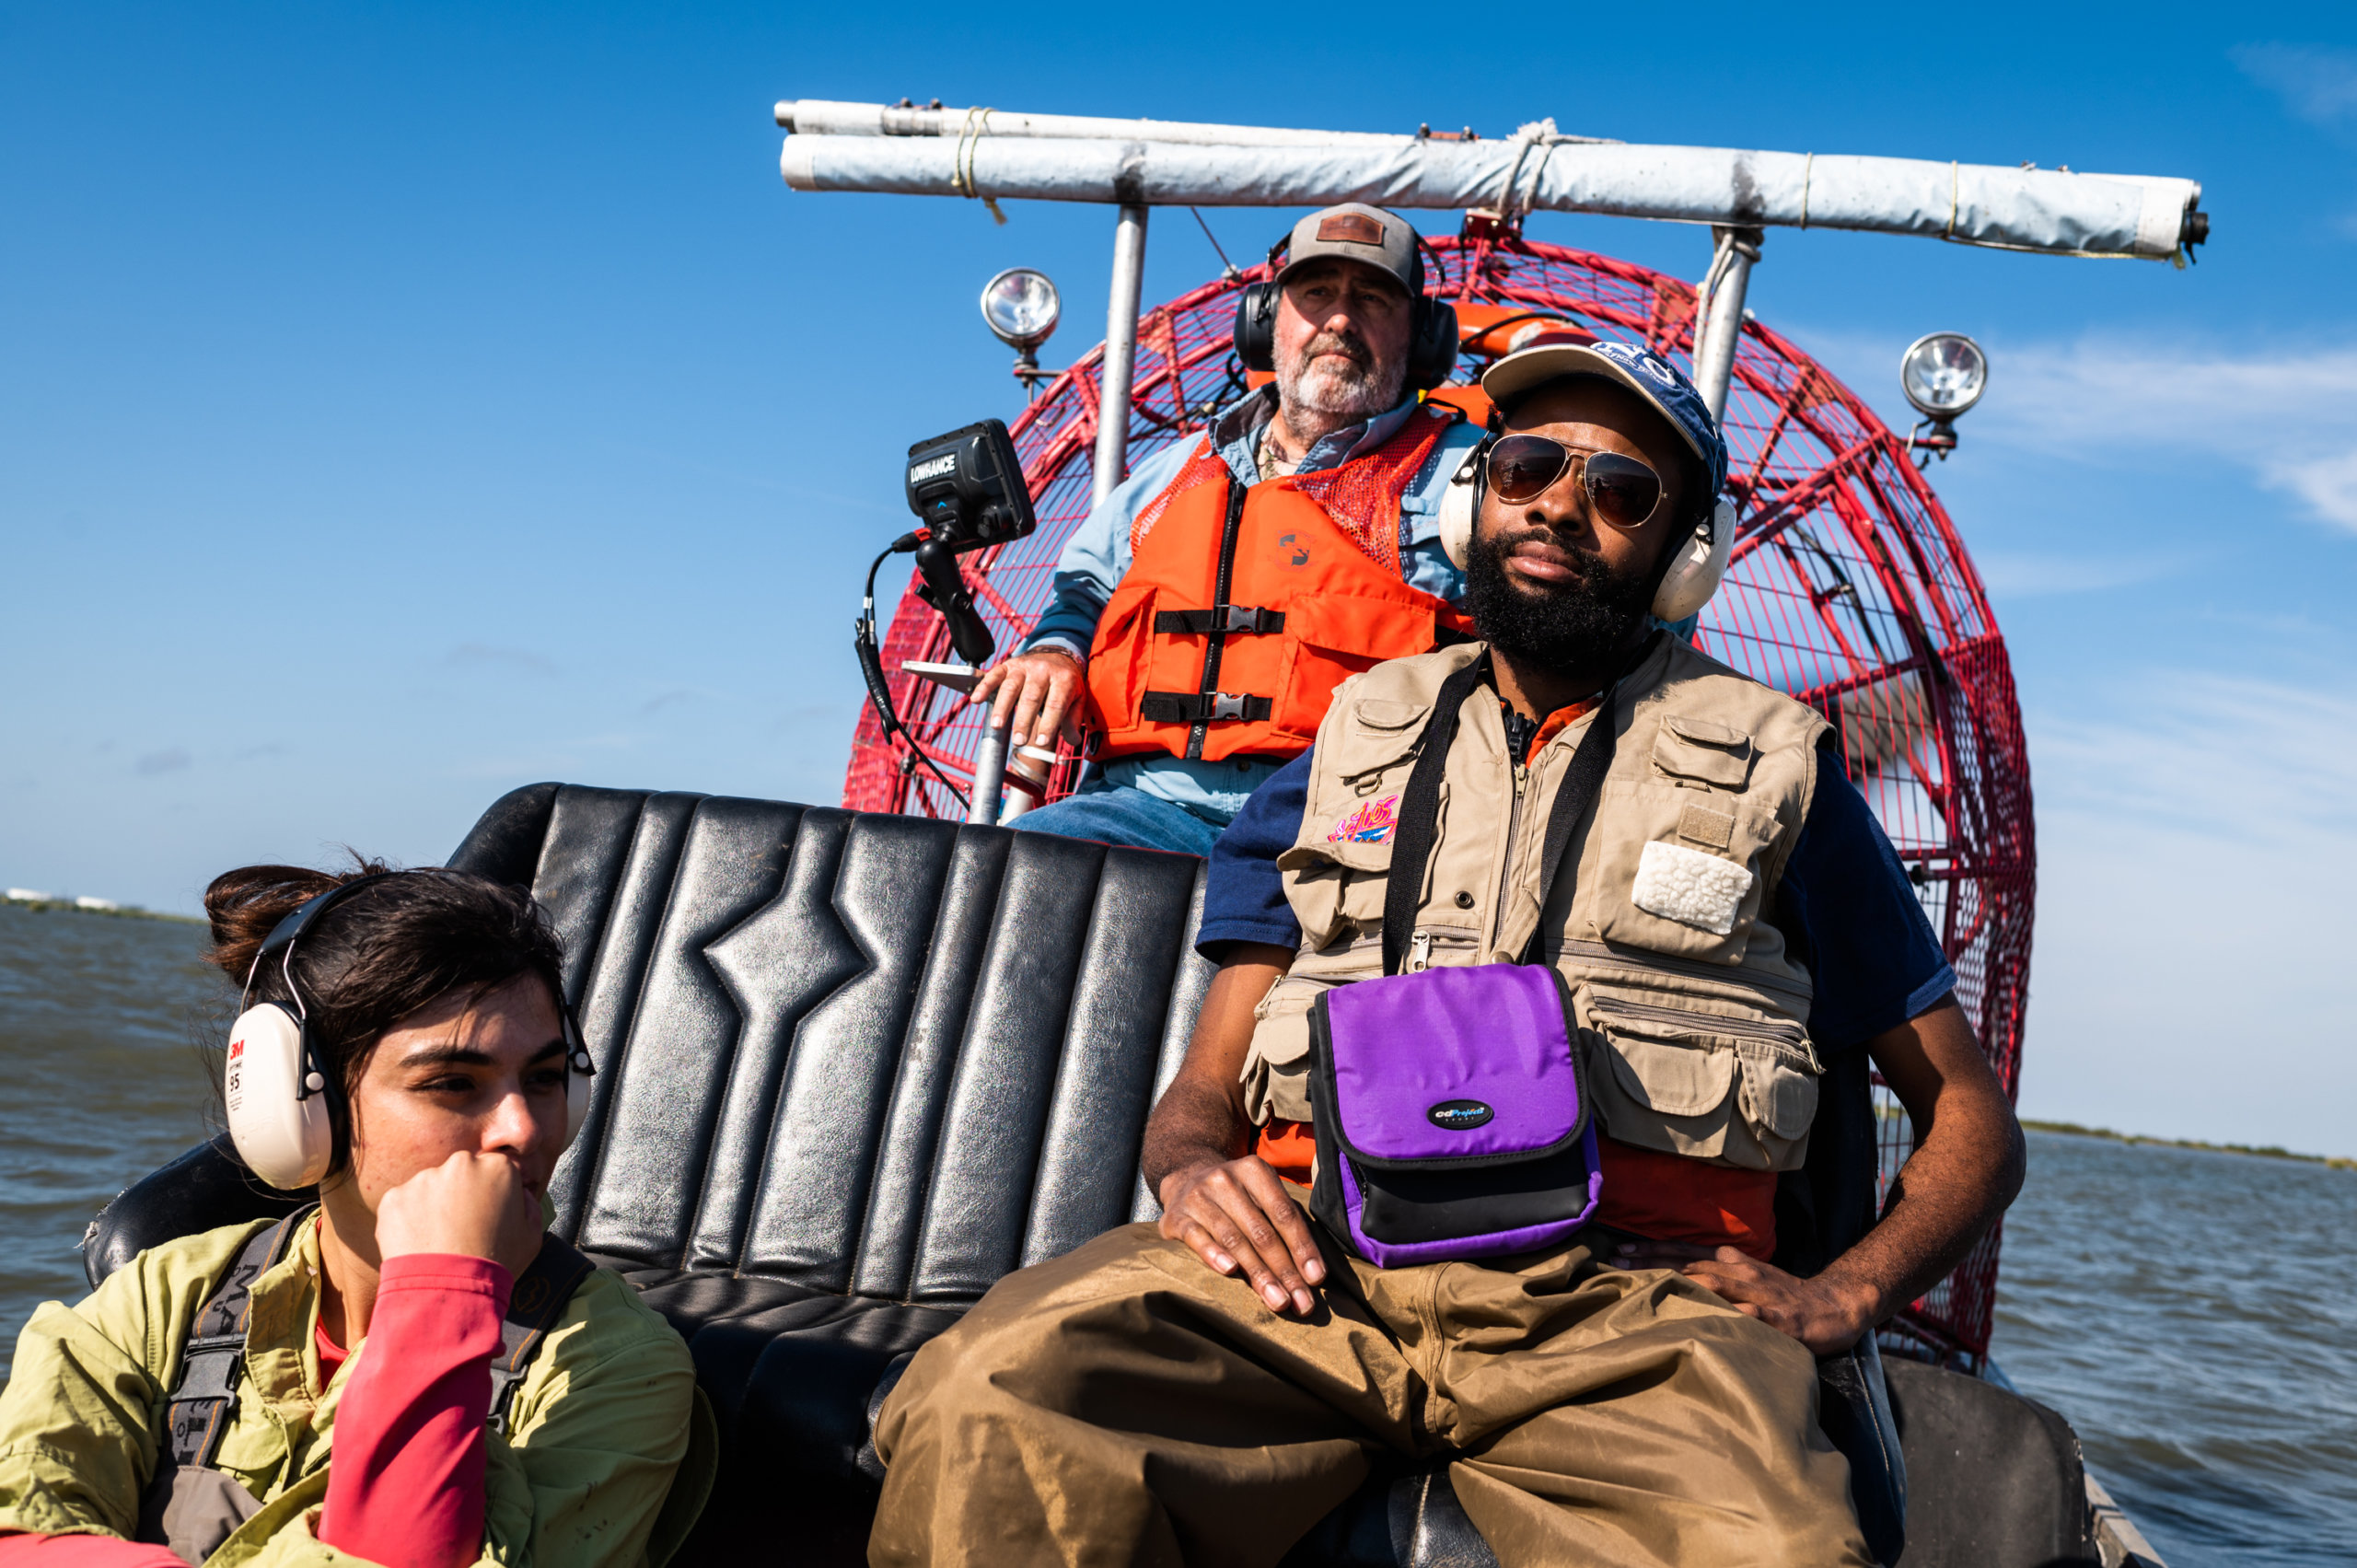 Crew from Water Institute of the Gulf on an airboat en route to a research platform site